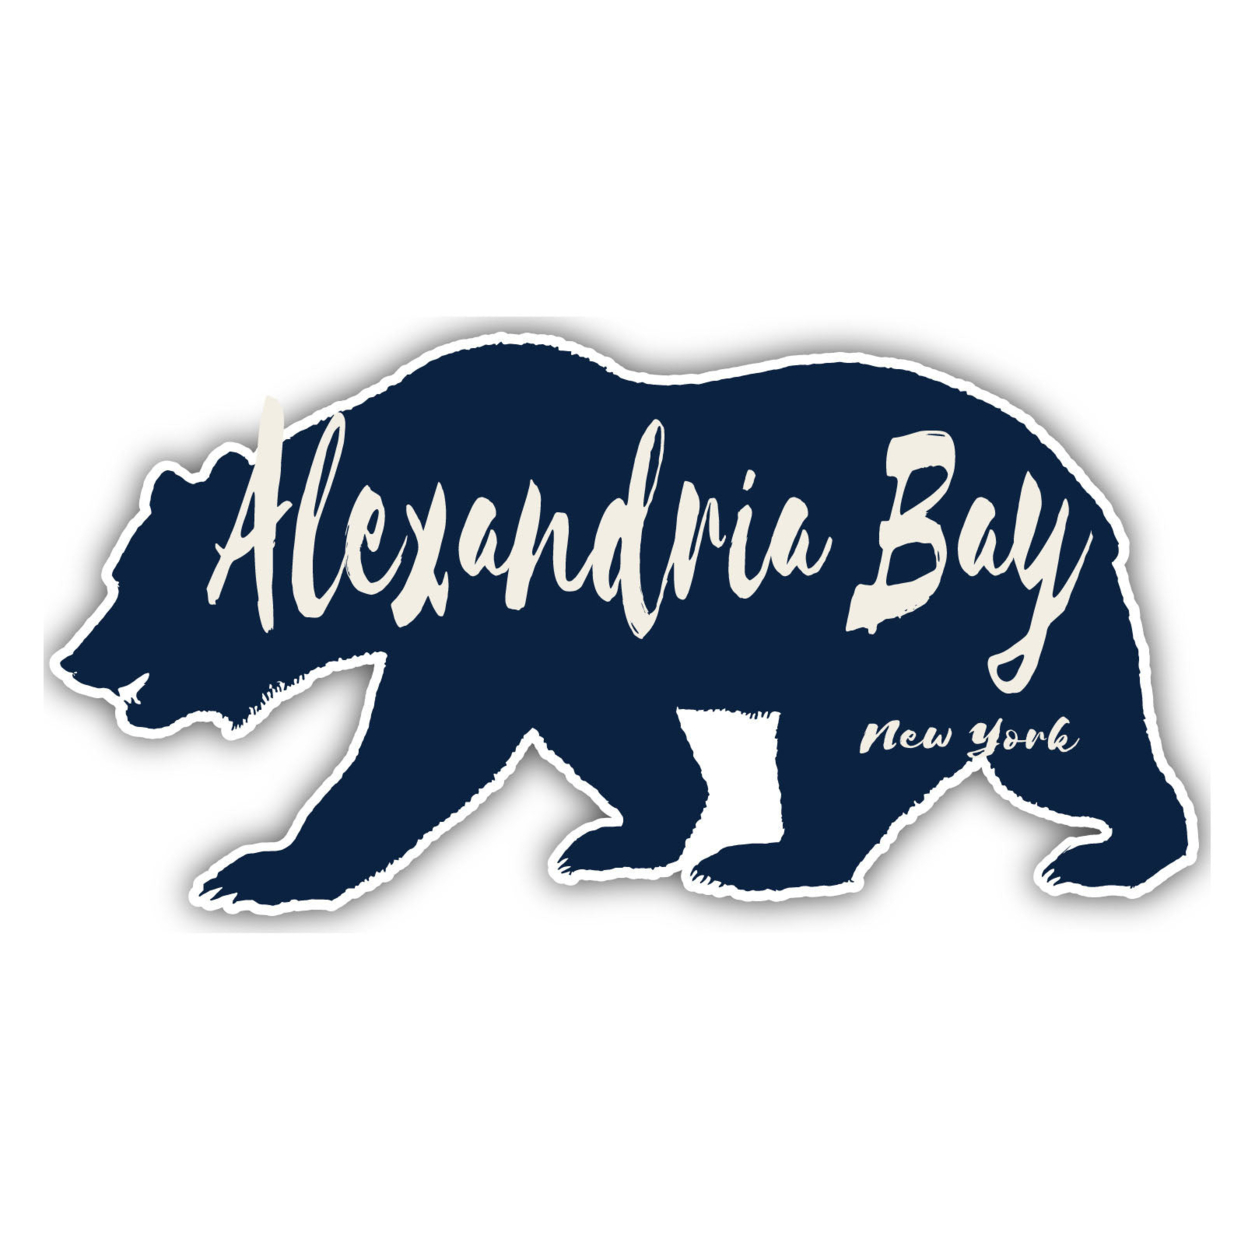 Alexandria Bay New York Souvenir Decorative Stickers (Choose Theme And Size) - 4-Pack, 8-Inch, Bear